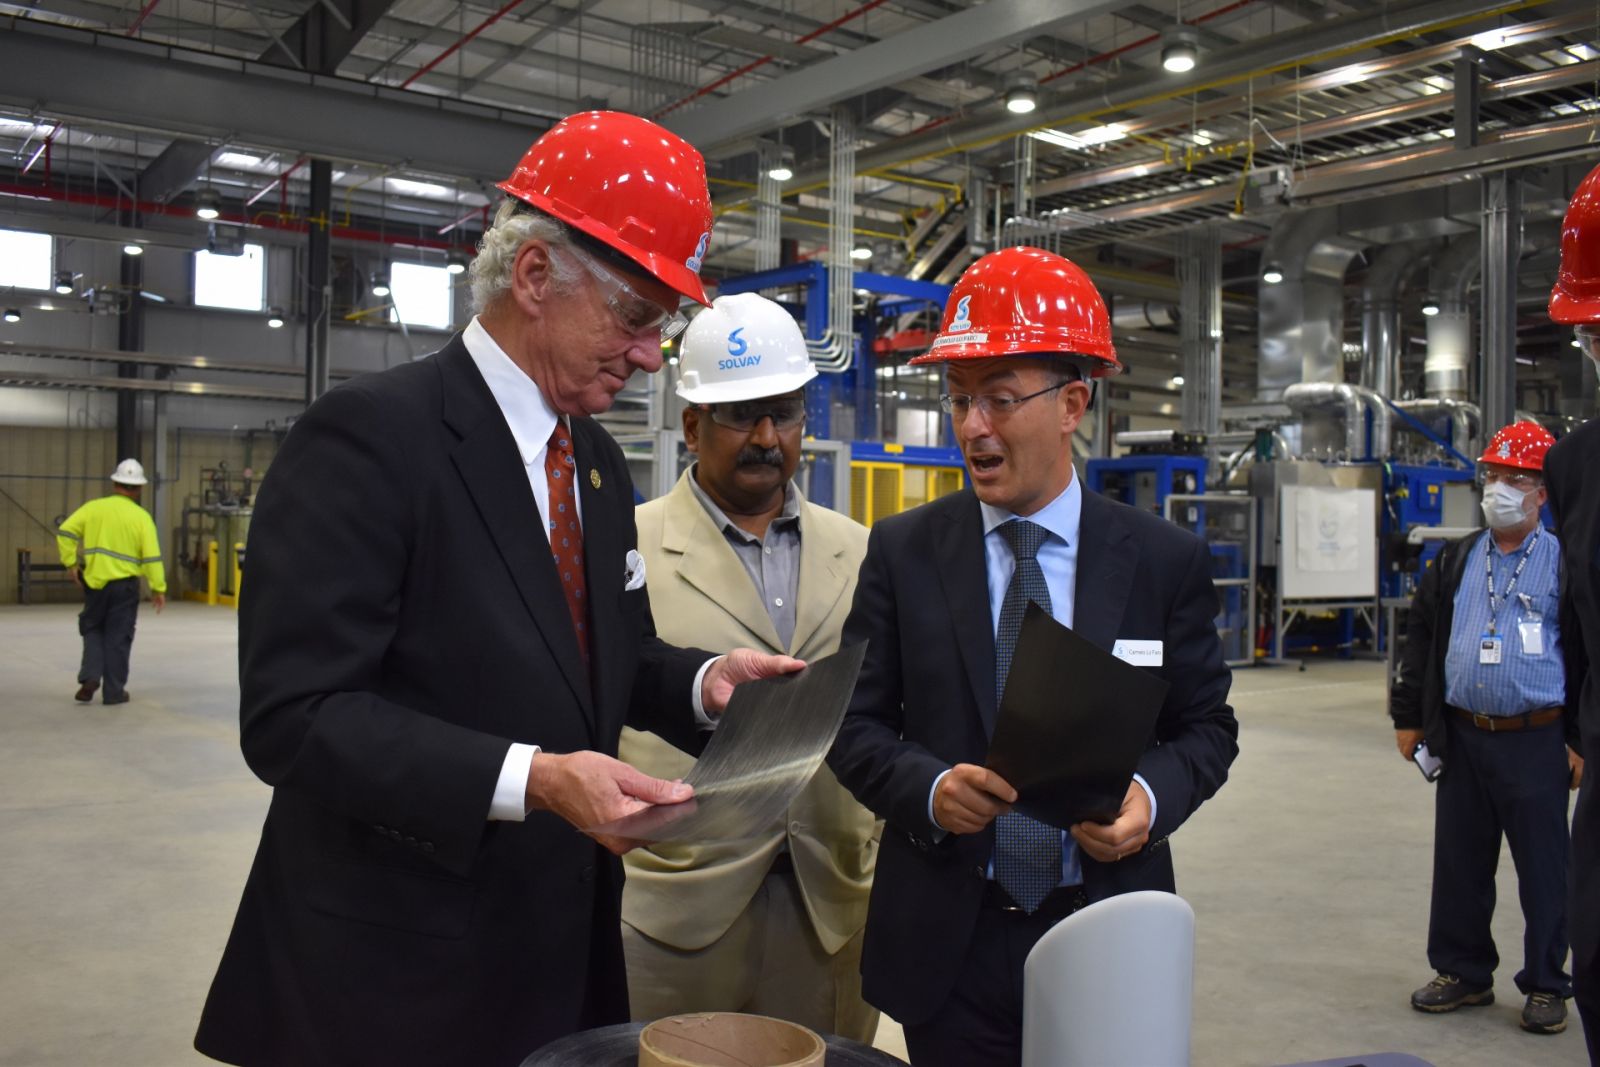 Solvay officials Prasad Donti and Carmelo Lo Faro discuss the new TPC product lines with Gov. Henry McMaster at the new Piedmont facility. (Photo/Molly Hulsey)